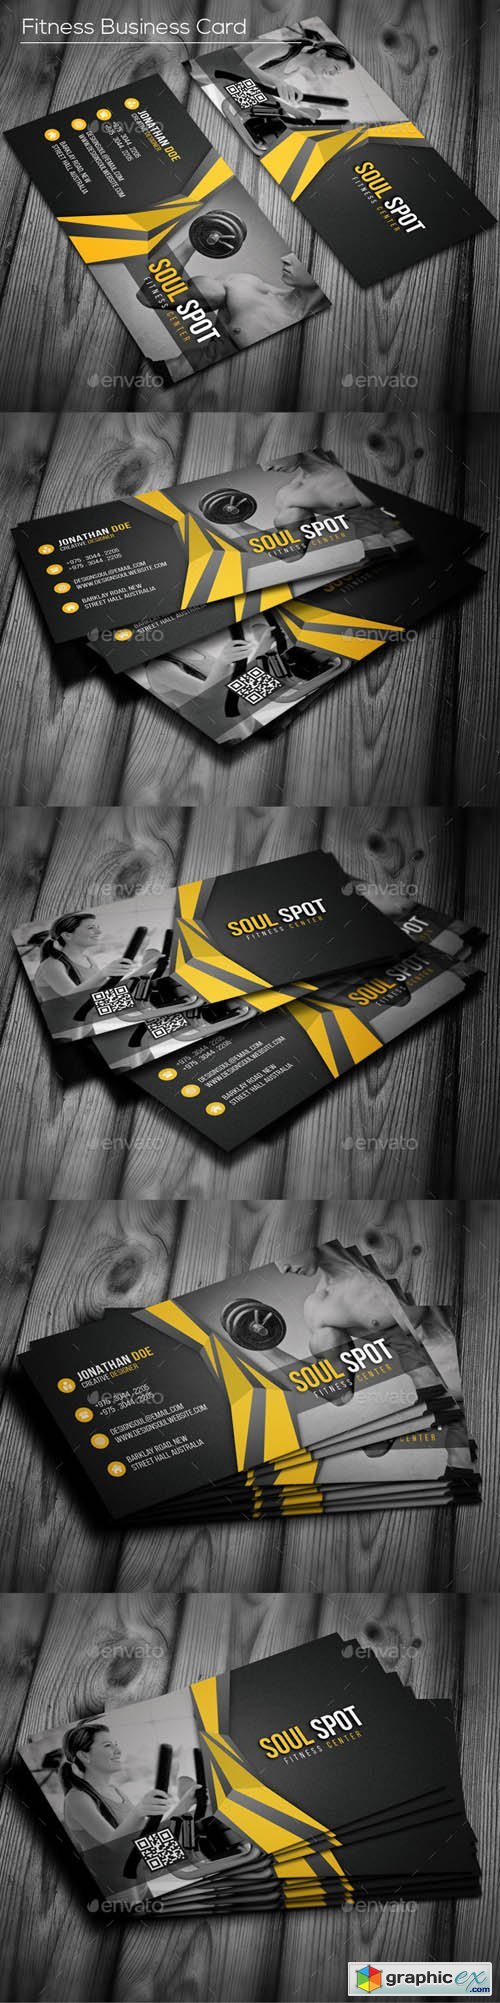 Fitness Business Card 16835858